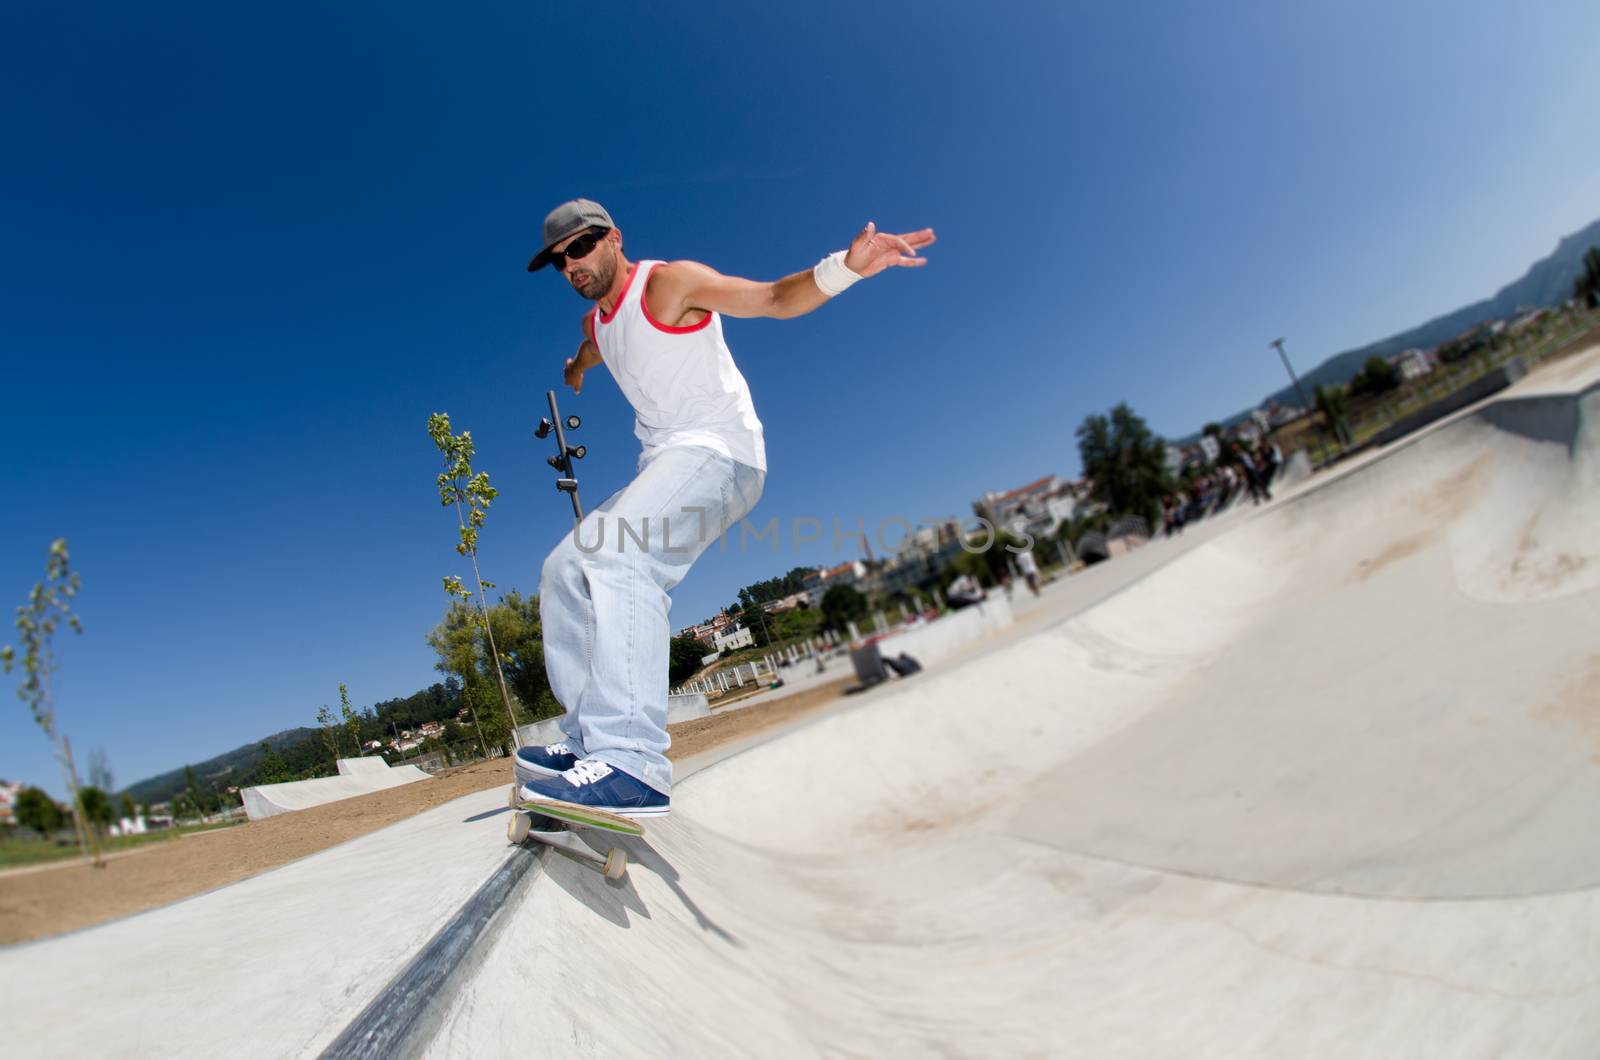 Skateboarder in a concrete pool at skatepark on a sunny day.